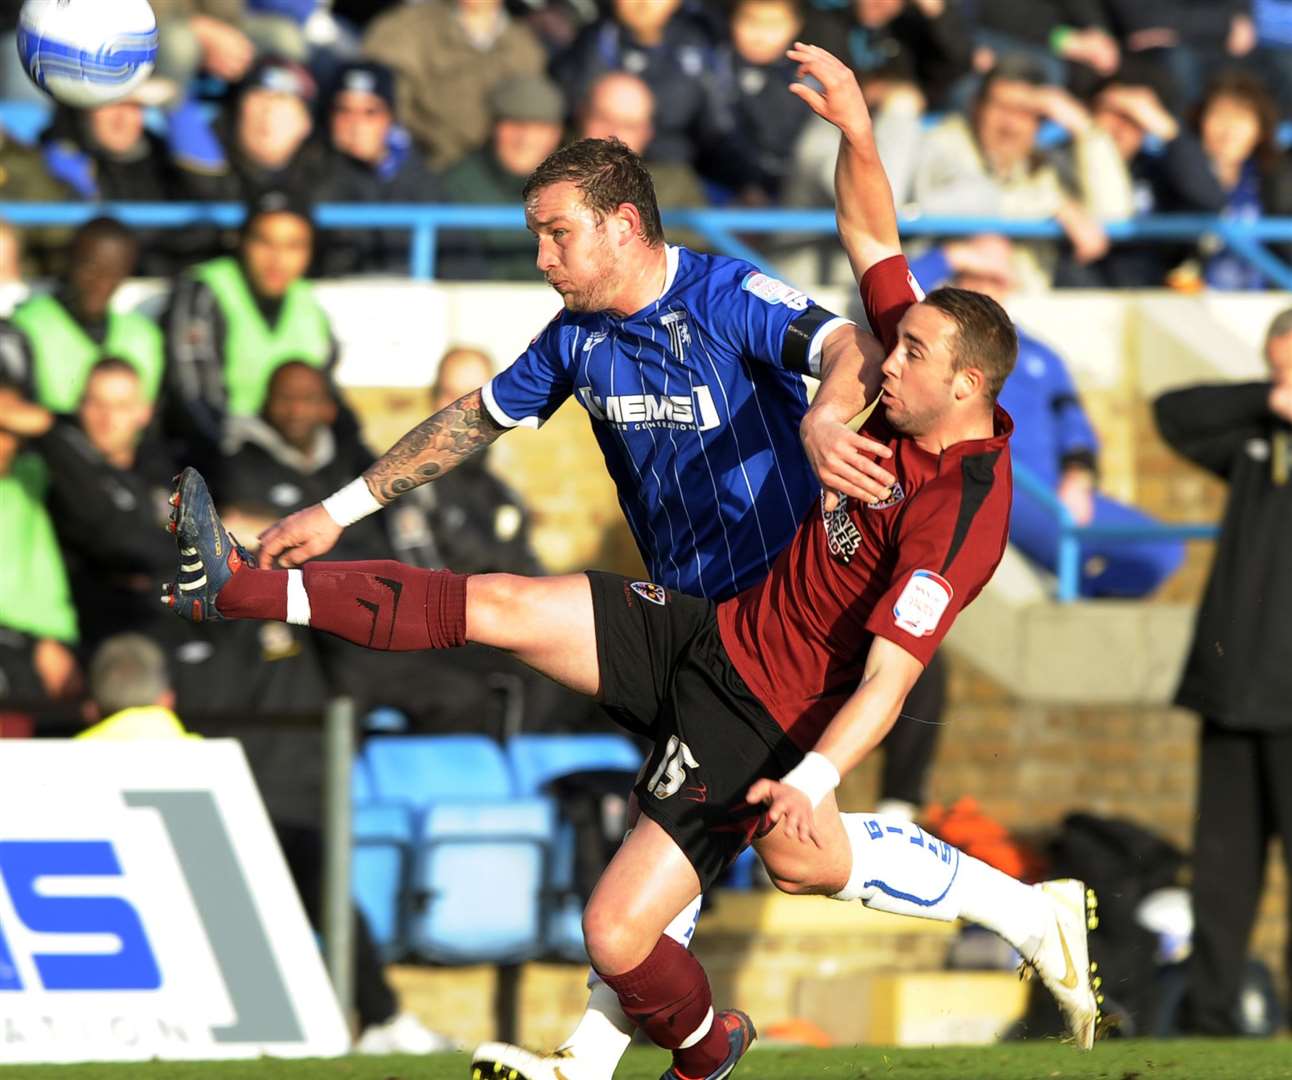 Deal-born Sammy Moore in action for AFC Wimbledon at Gillingham back in 2012. Picture: Barry Goodwin